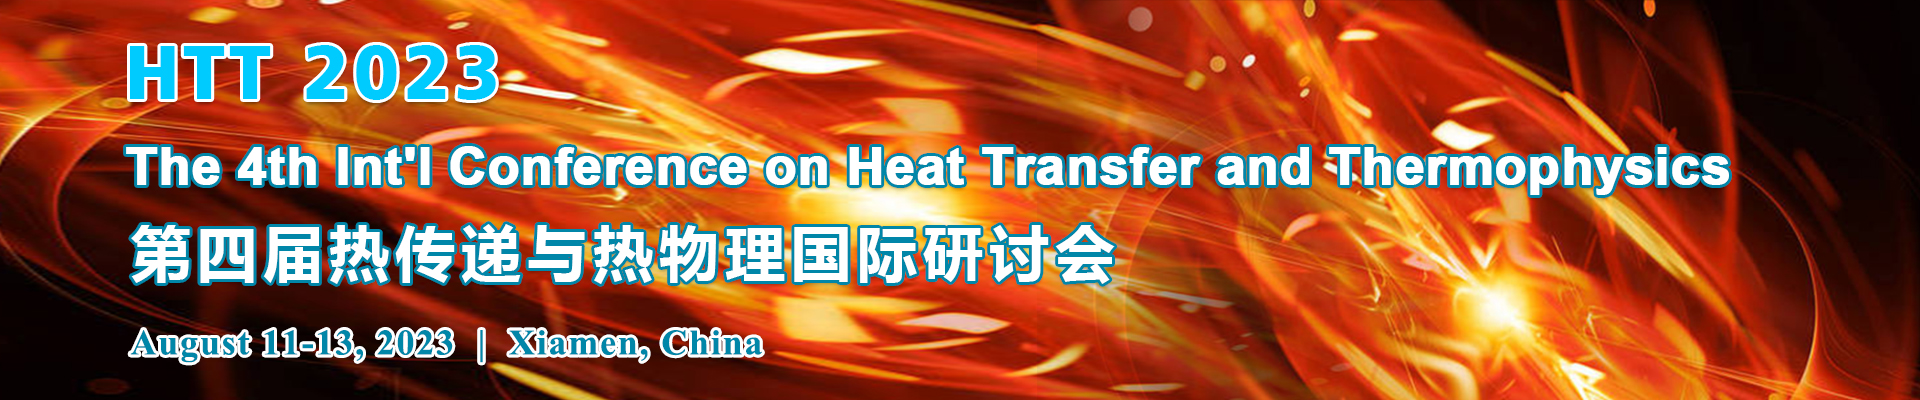 The 4th Int'l Conference on Heat Transfer and Thermophysics (HTT 2023), Xiamen, Fujian, China